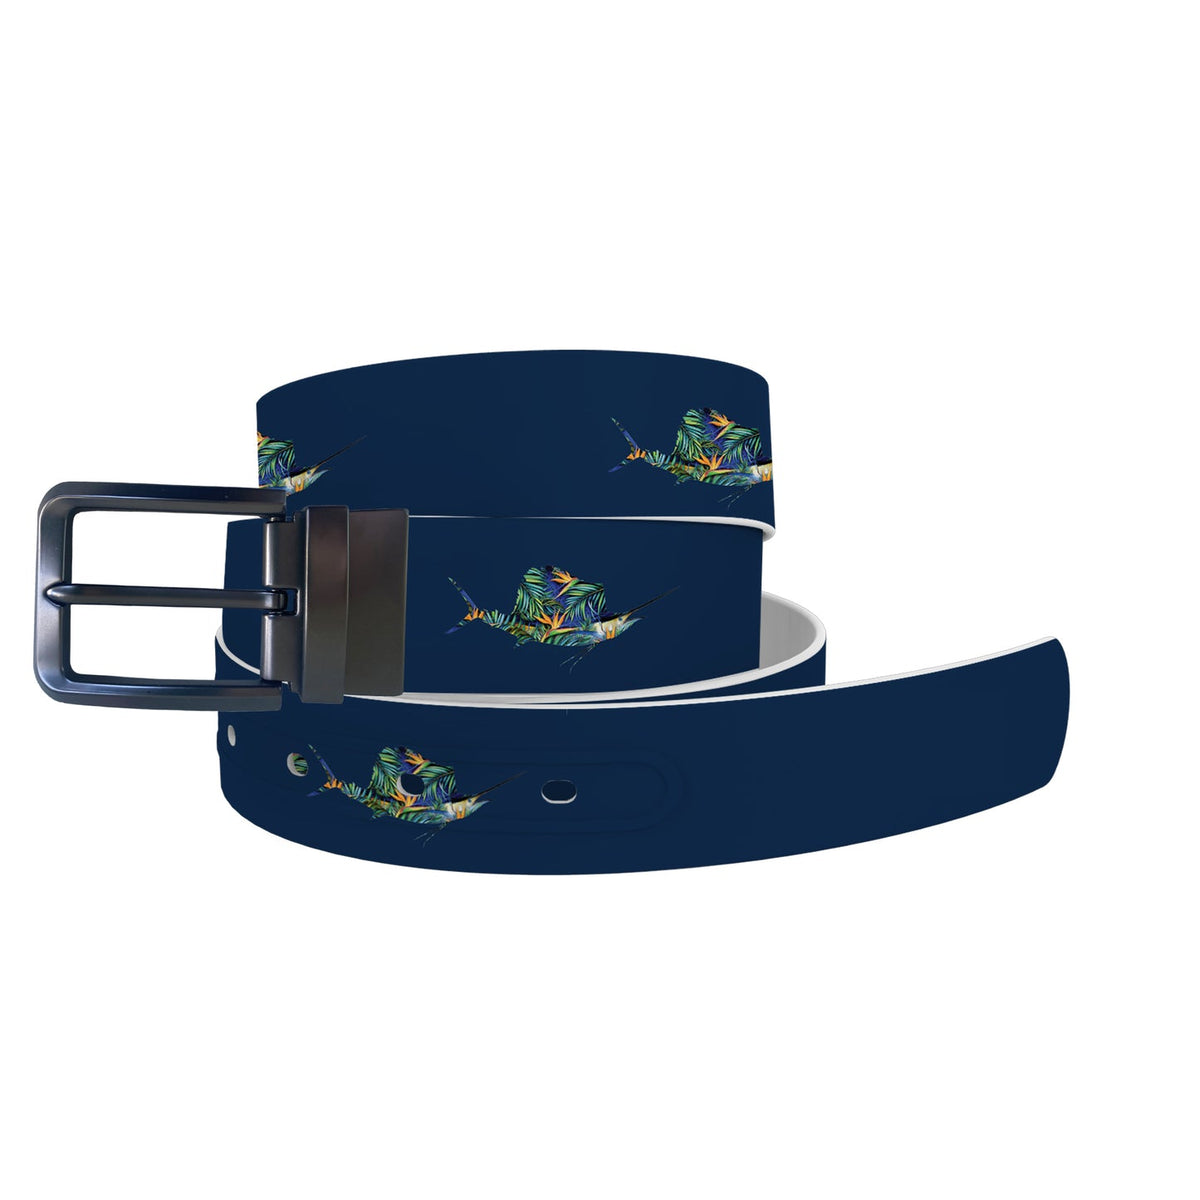 SCALES Fly Sail Belt